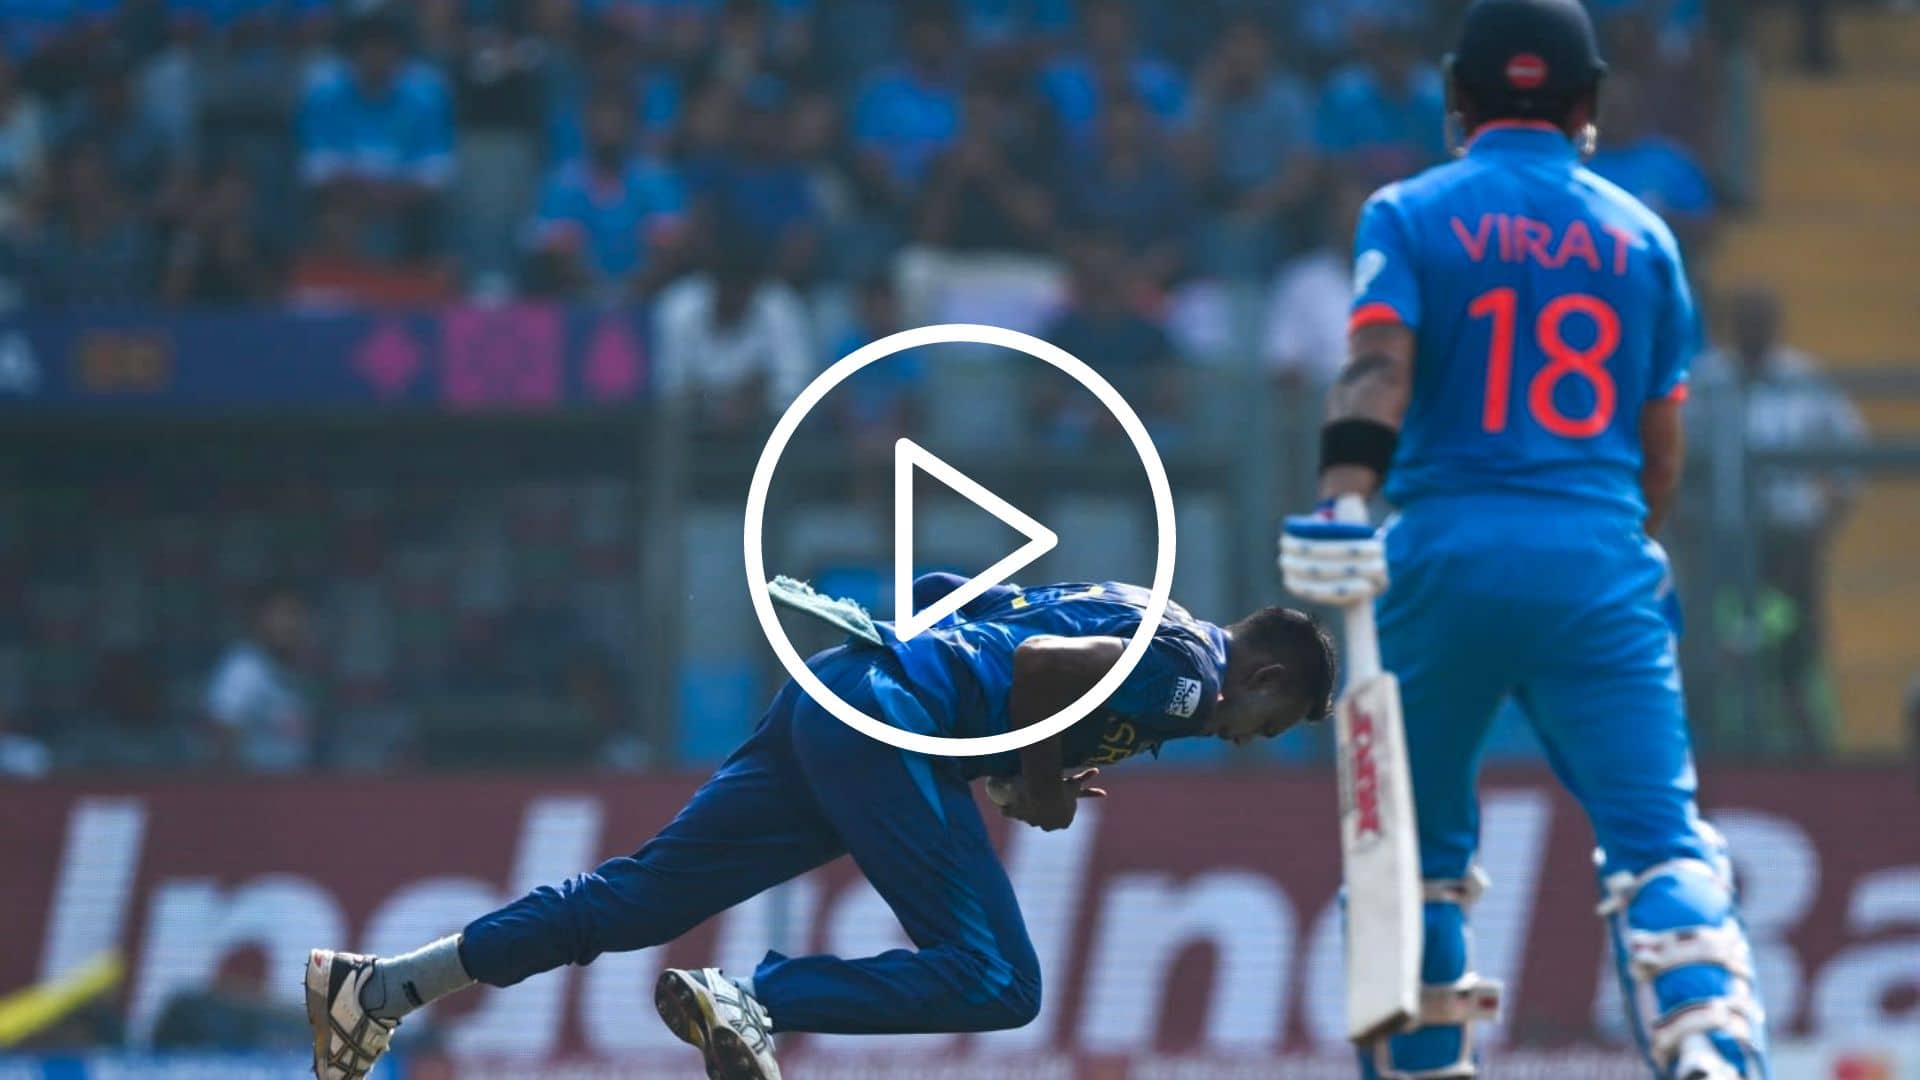 [Watch] Chameera's Brilliant Seam Bowling Made Virat Kohli Look A Cat On A Hot Tin Roof